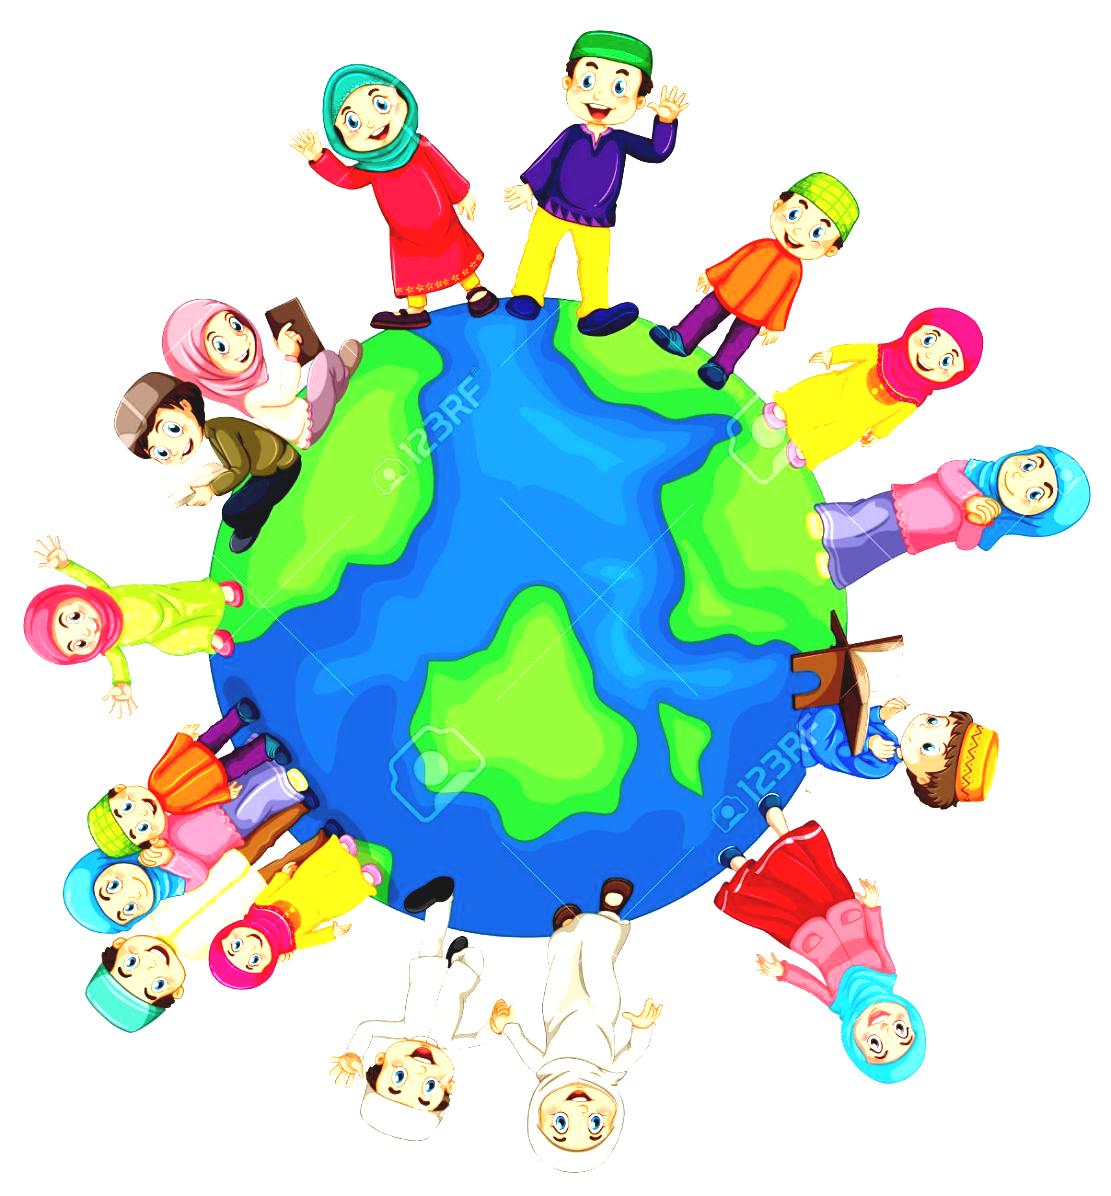 world-religions-map-for-kids